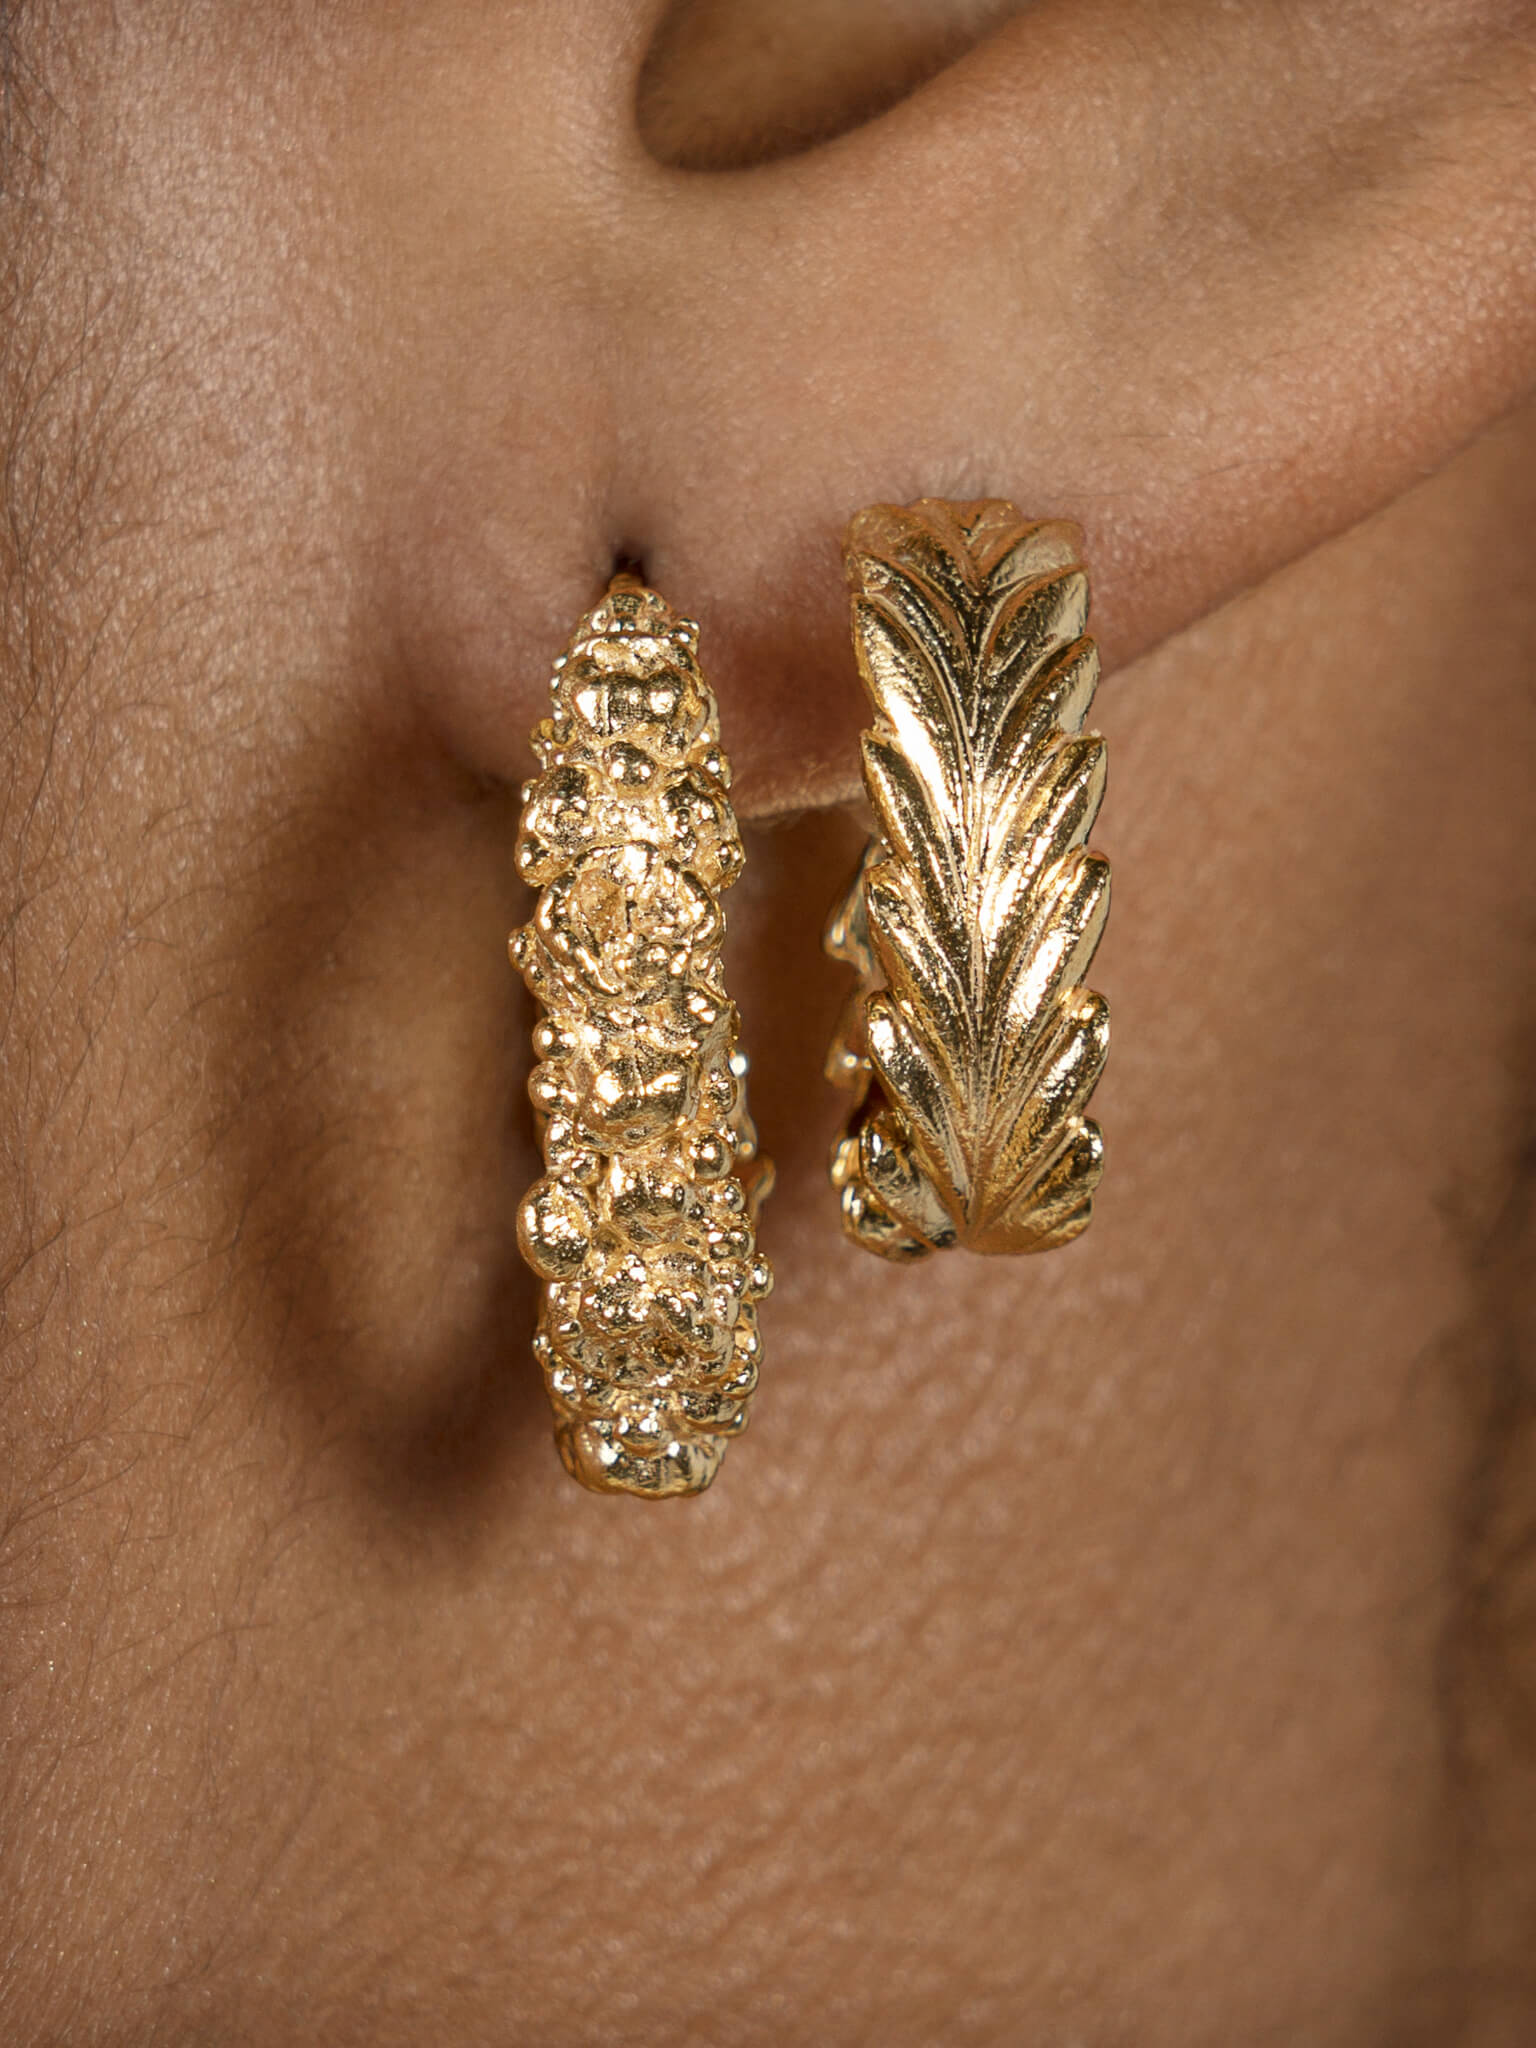 A close-up photo of a woman's hear featuring the Garden Hoops by Cremilde Bispo Jewellery in Gold Plated Silver.